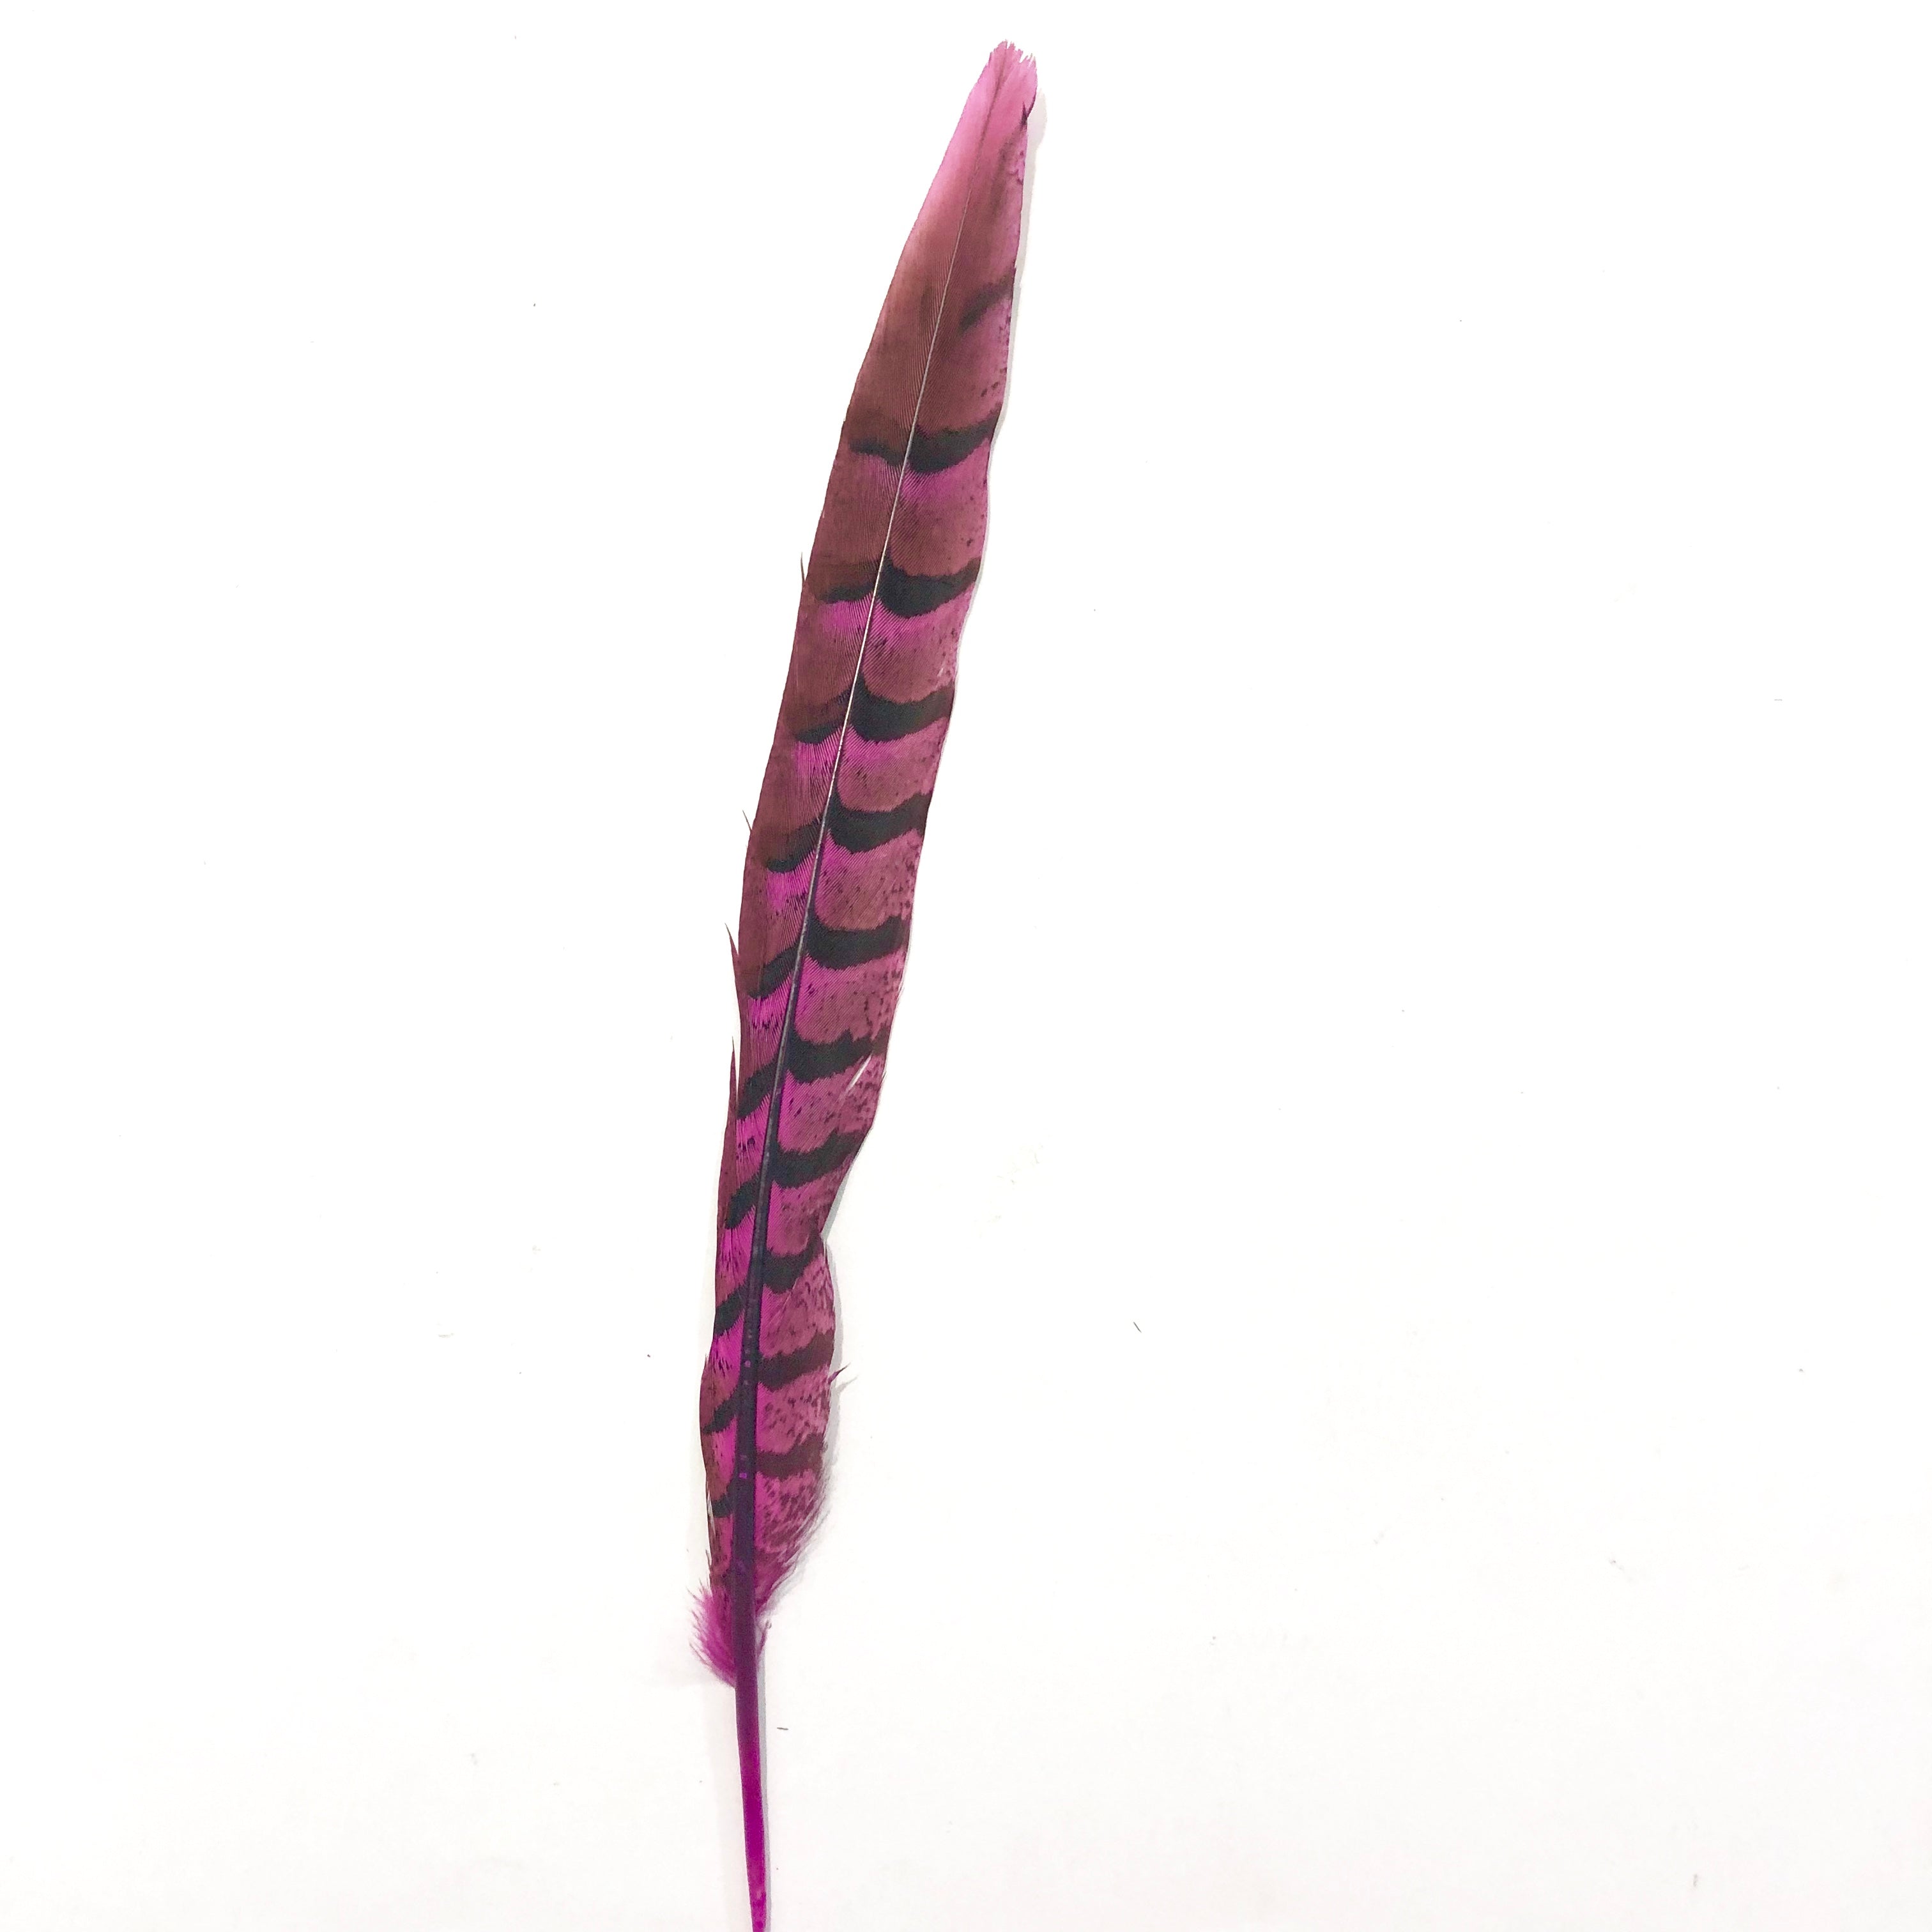 8" to 10" Reeves Pheasant Tail Feather - Hot Pink